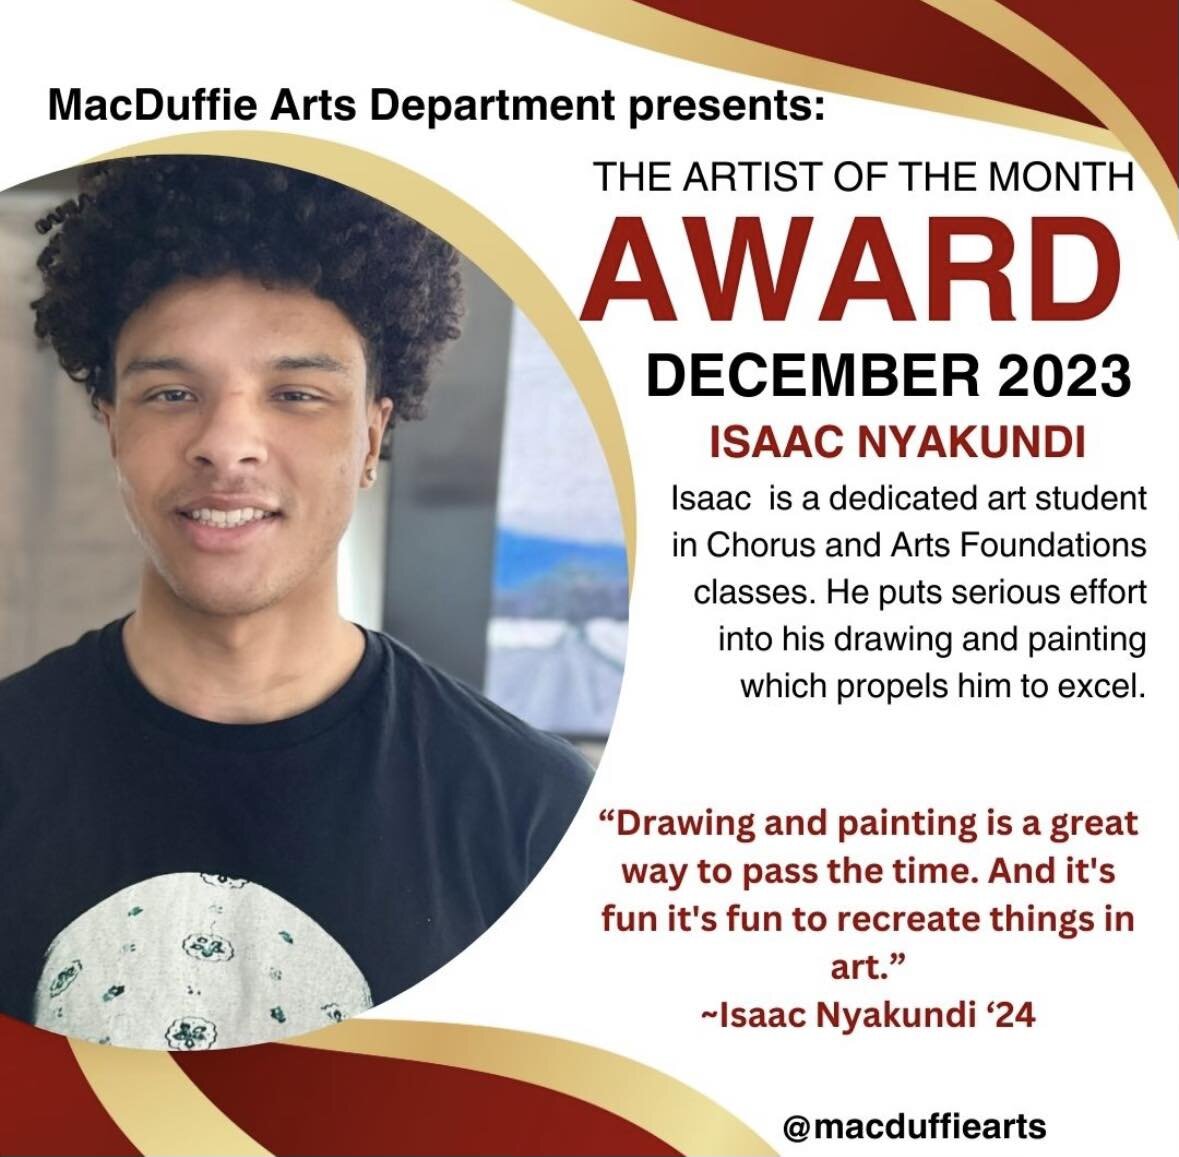 Congratulations, Isaac &lsquo;24, December&rsquo;s Artist of the Month. 

Please enjoy some of Isaac&rsquo;s work: perspective, still life, and self portrait. 

#themacduffieschool #creativity #artsineducation #macduffiearts